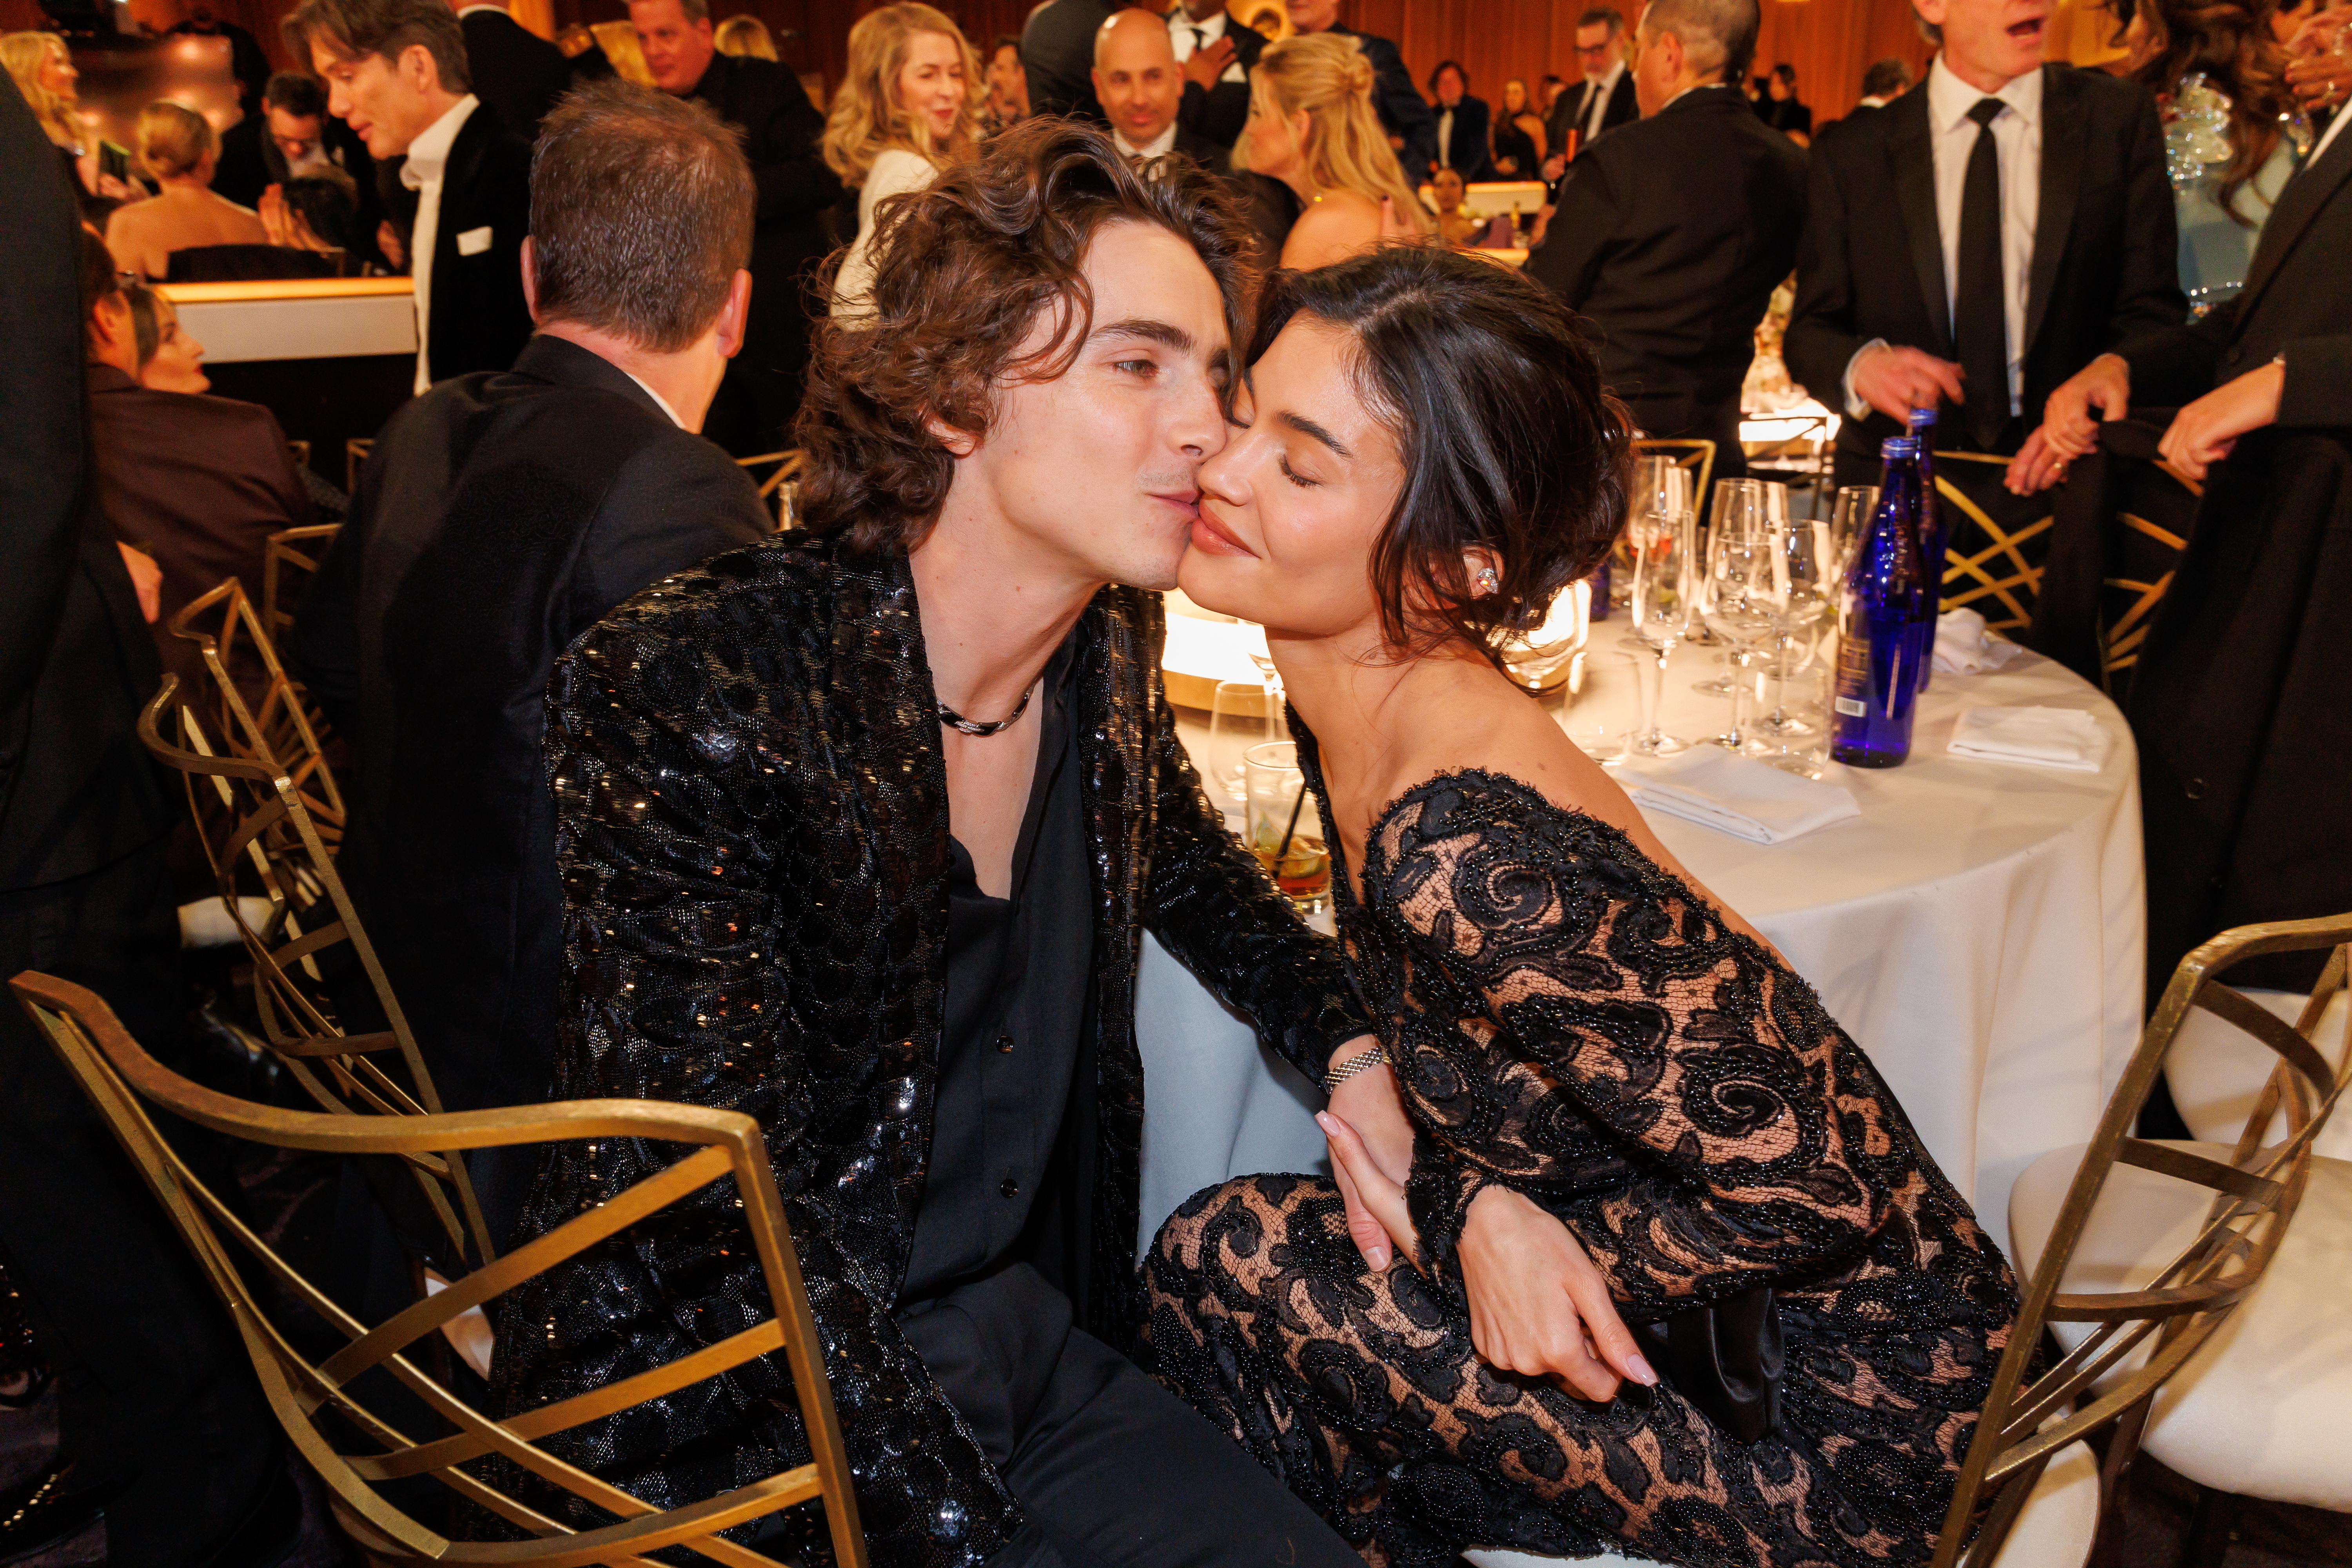 Kylie is rumored to have ended her relationship with actor, Timothée Chalamet